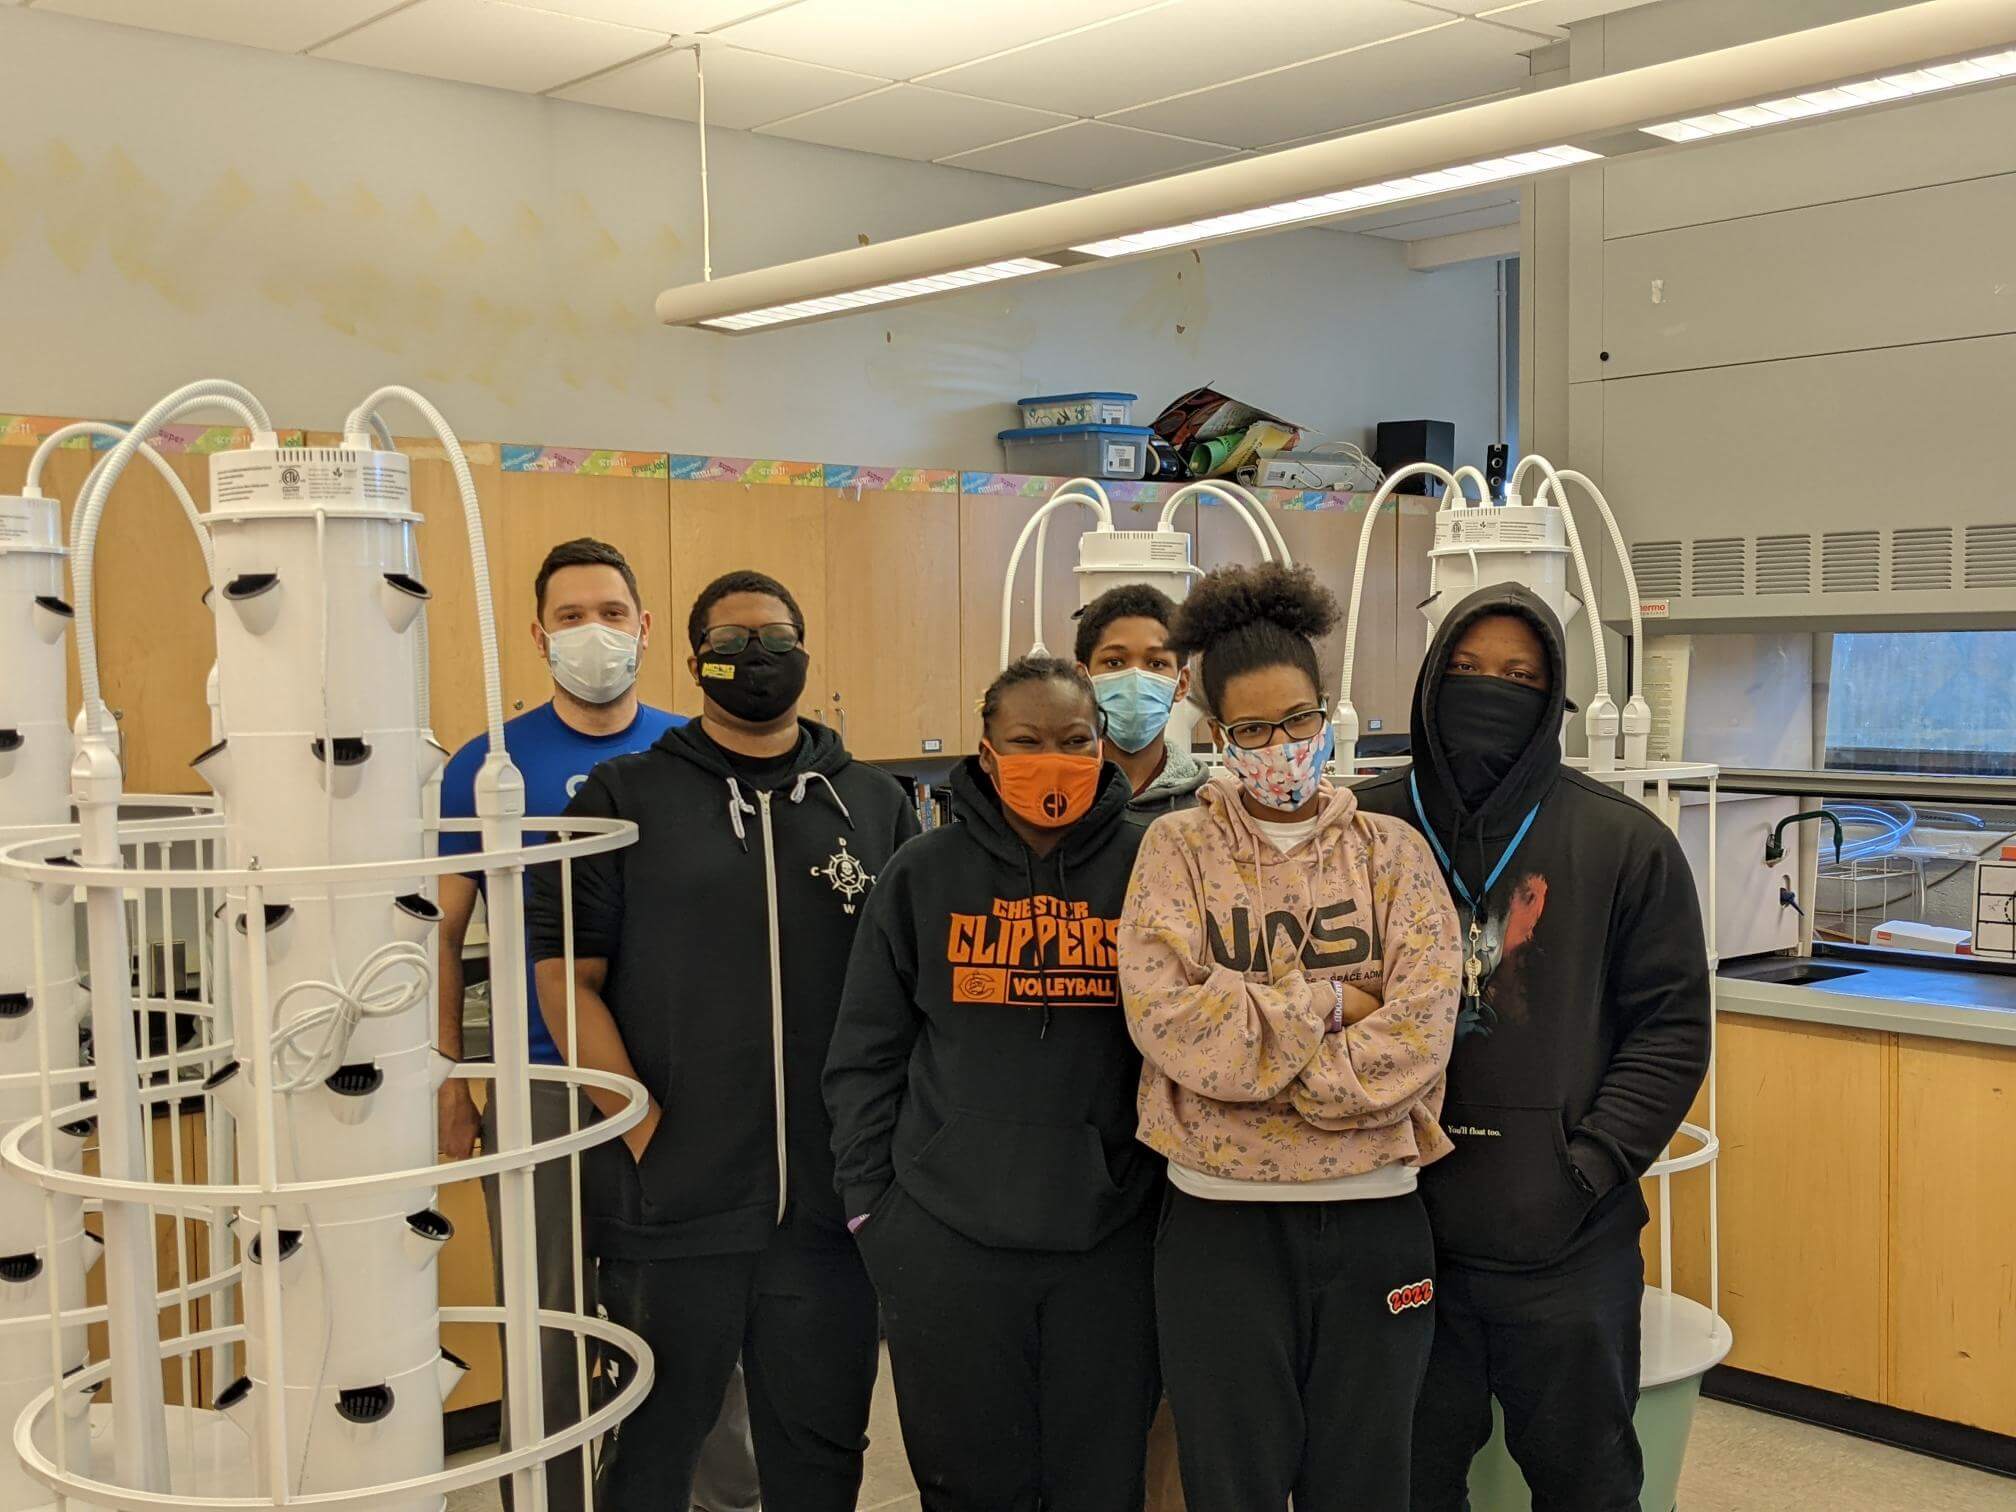 Stem Academy Local Leaders standing next to their 4 newly built tower gardens, along with their faculty advisor Mr. Piasecki. Pictured: Rachelle, Marima, Kam'ren, Desean, Deshawn, and Mr. Piasecki